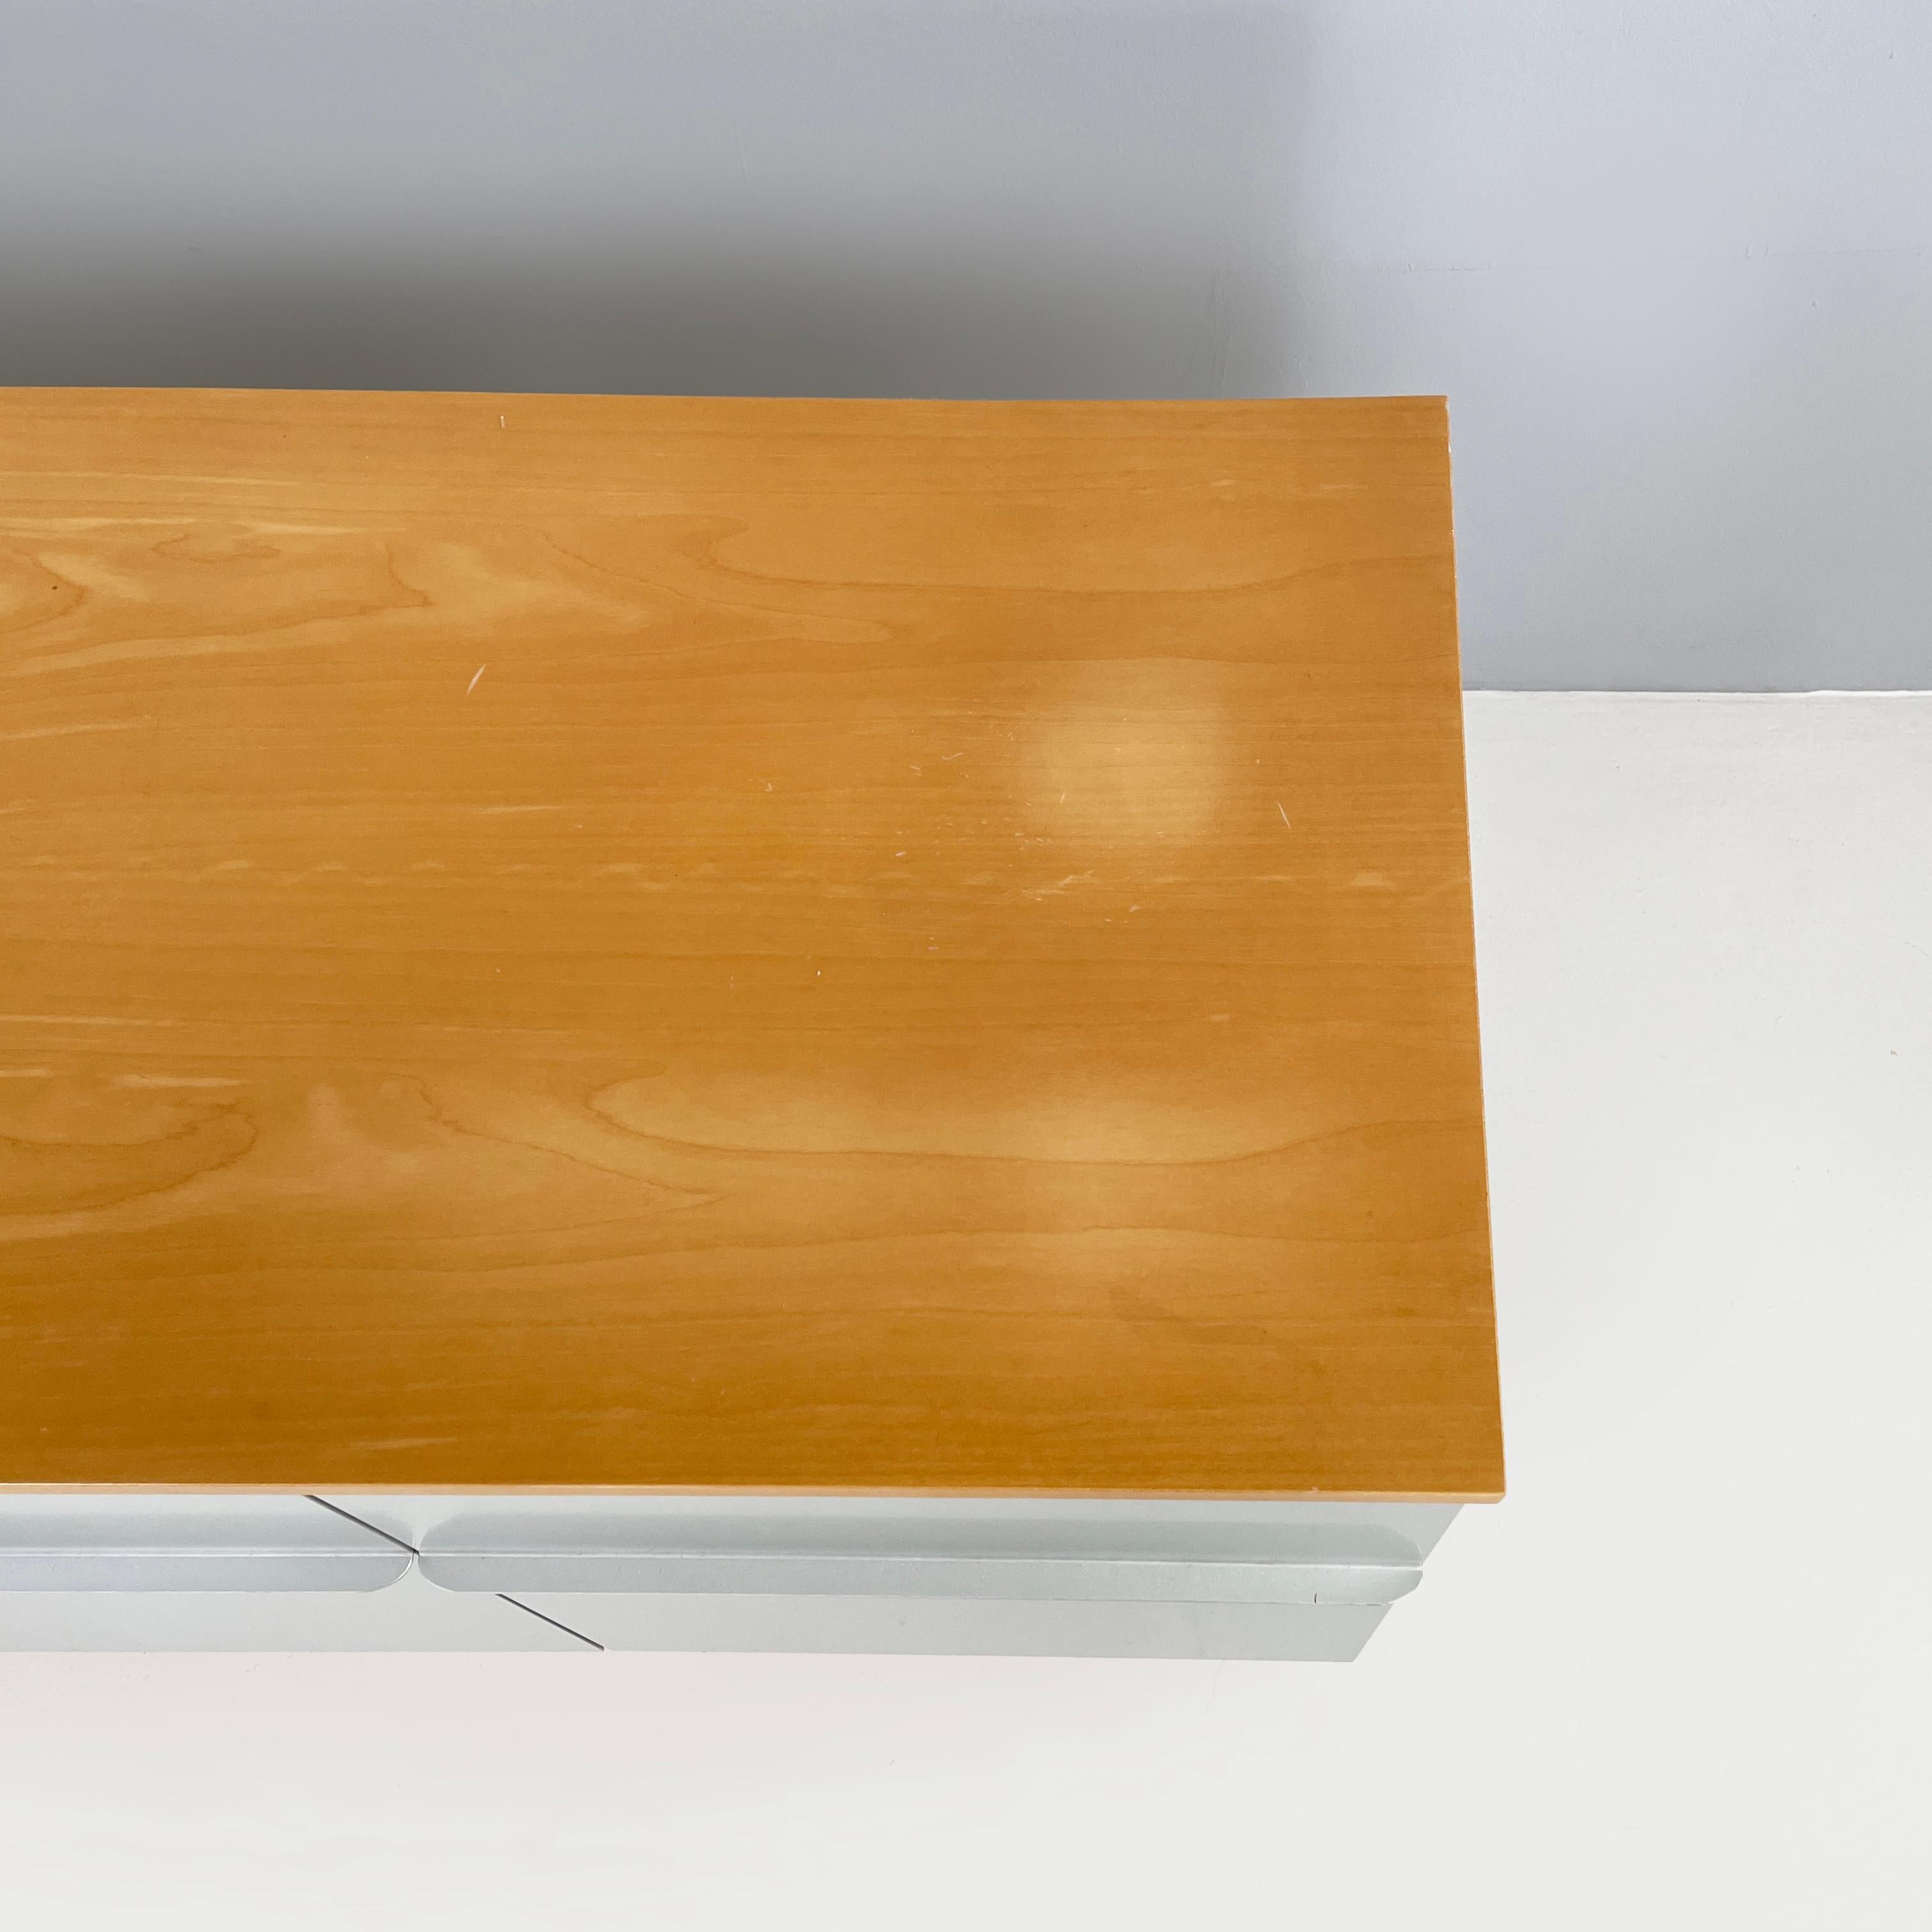 Metal Italian modern wood and metal sideboard by Vico Magistretti for De Padova, 1980s For Sale